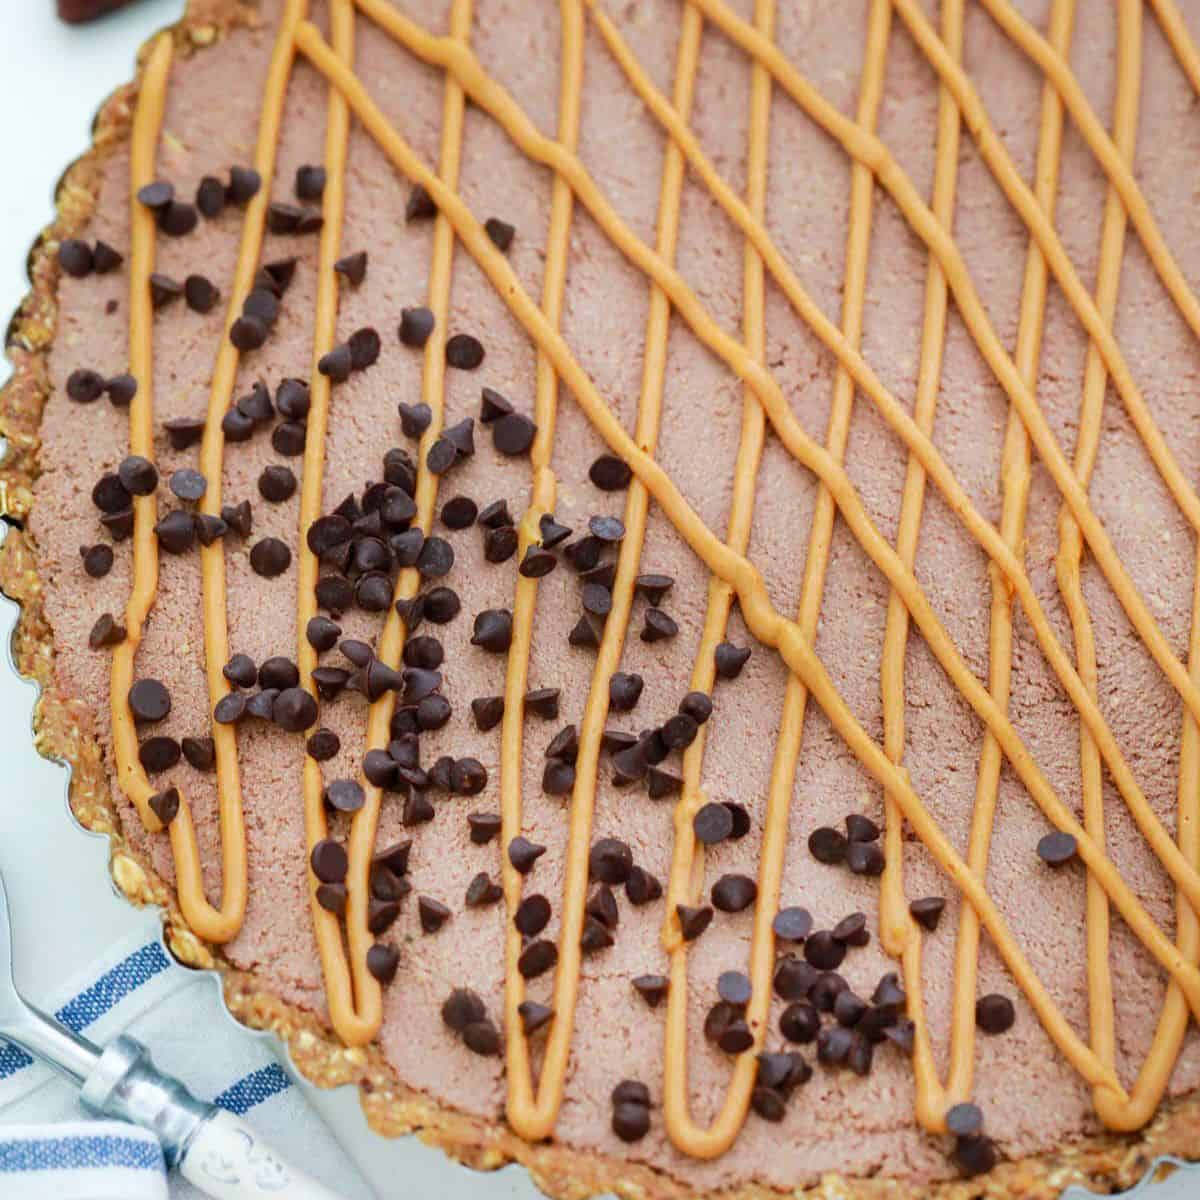 Peanut butter pie in tart pan with chocolate chips on top.